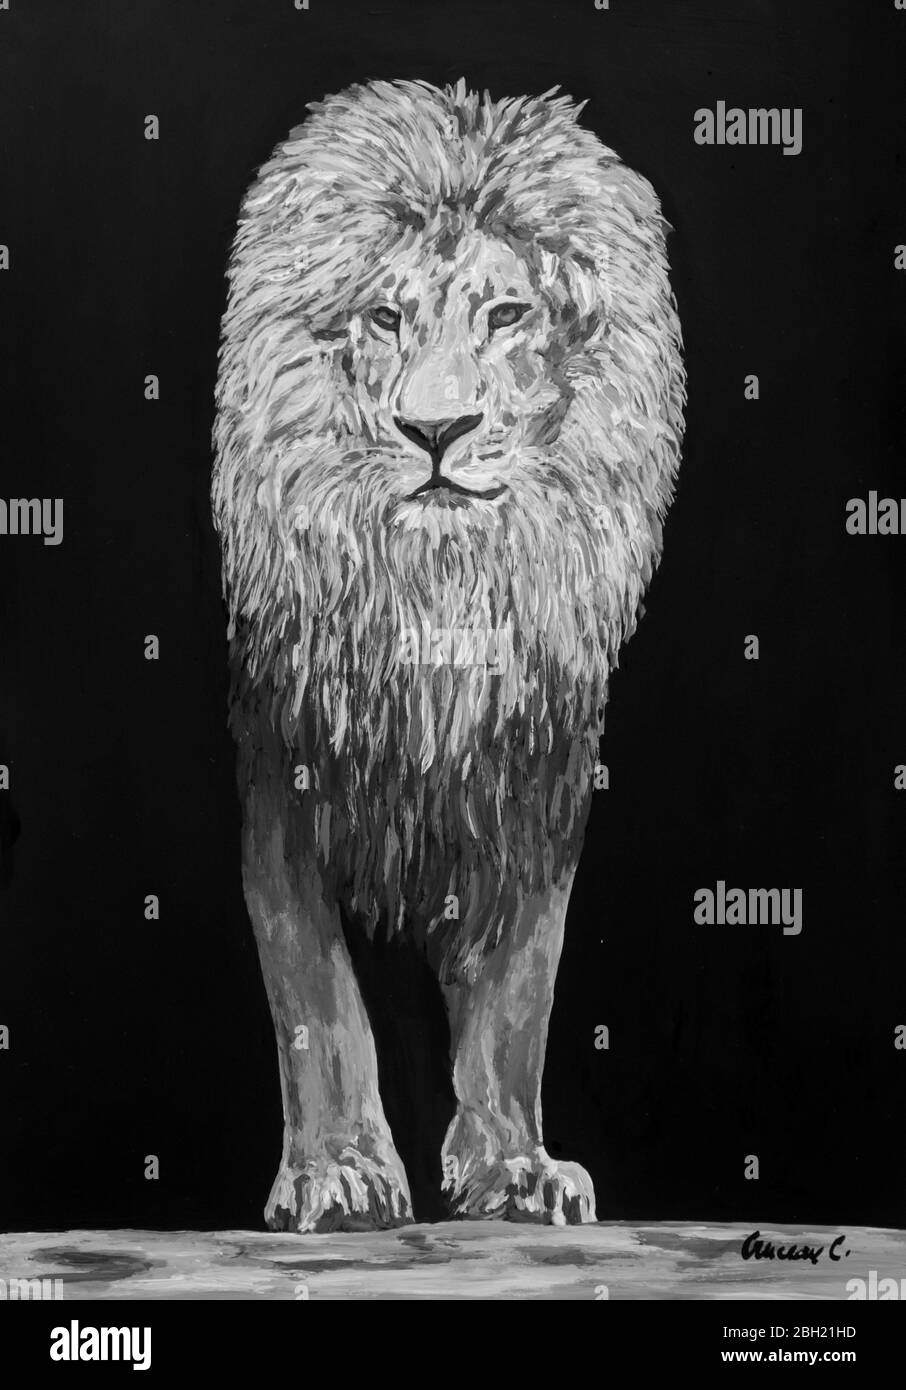 Lion painting Stock Photo